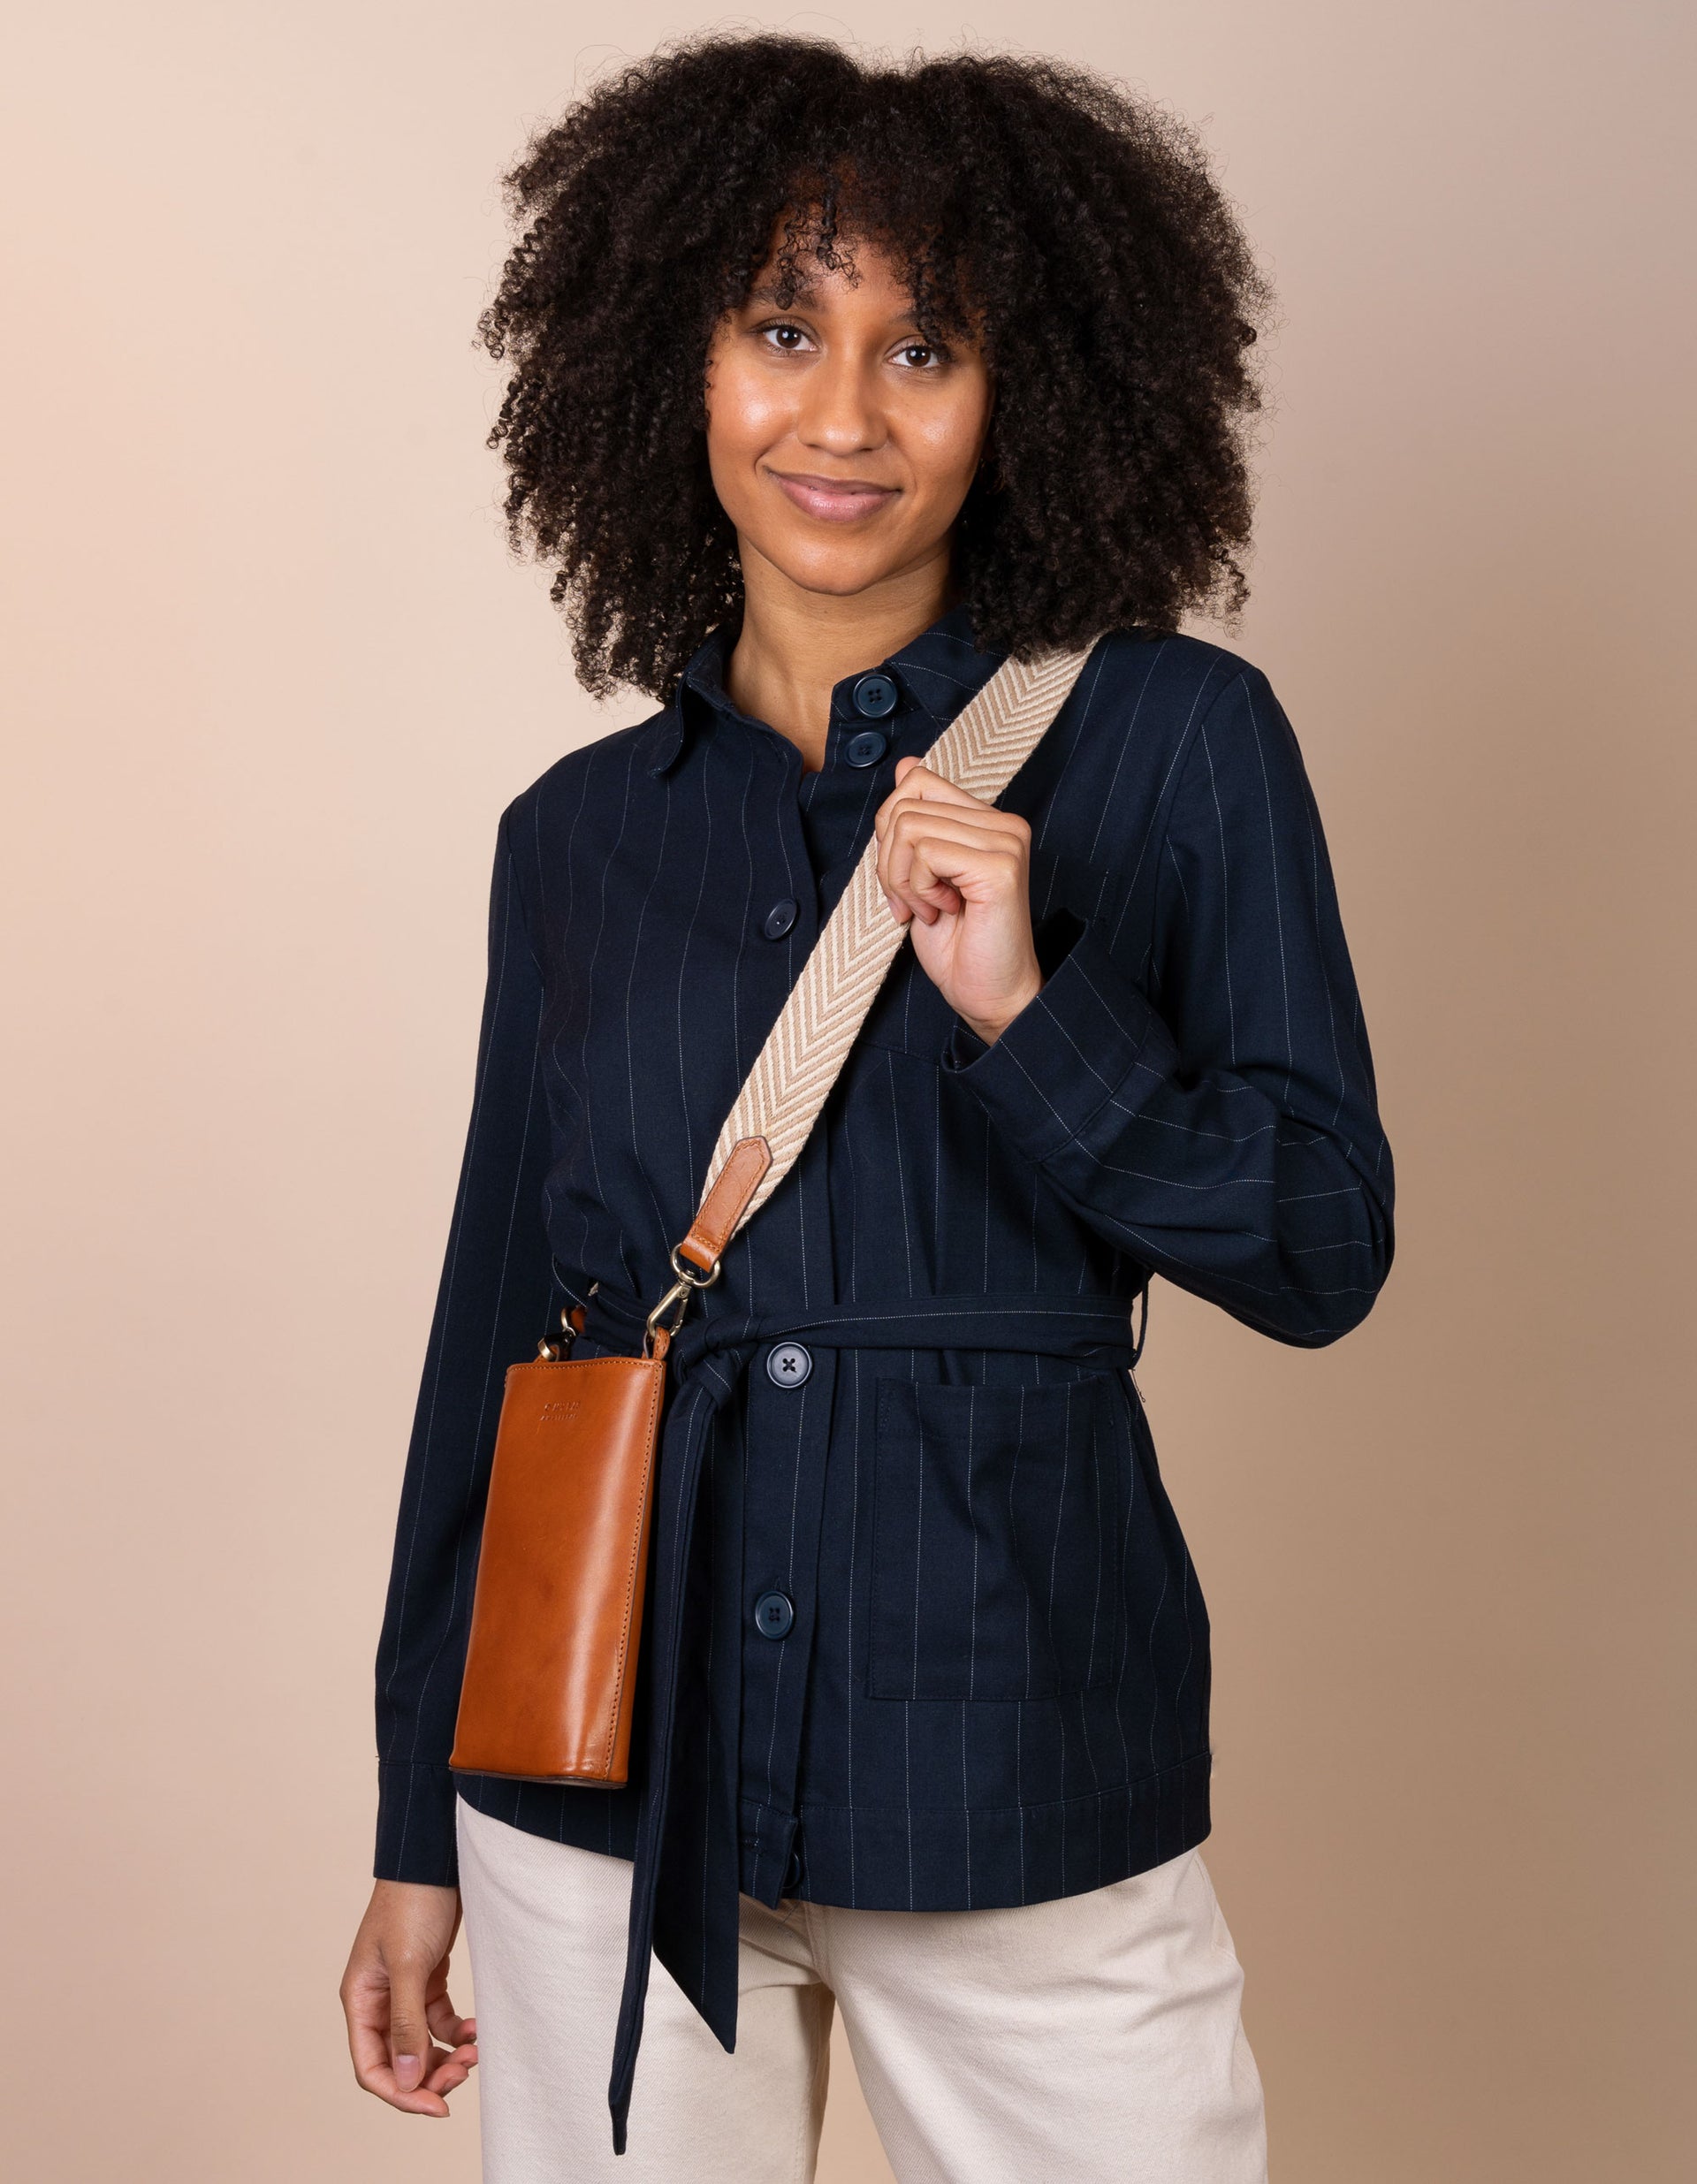 Charlie phone bag - cognac classic leather - female model product image with organic cotton webbing strap